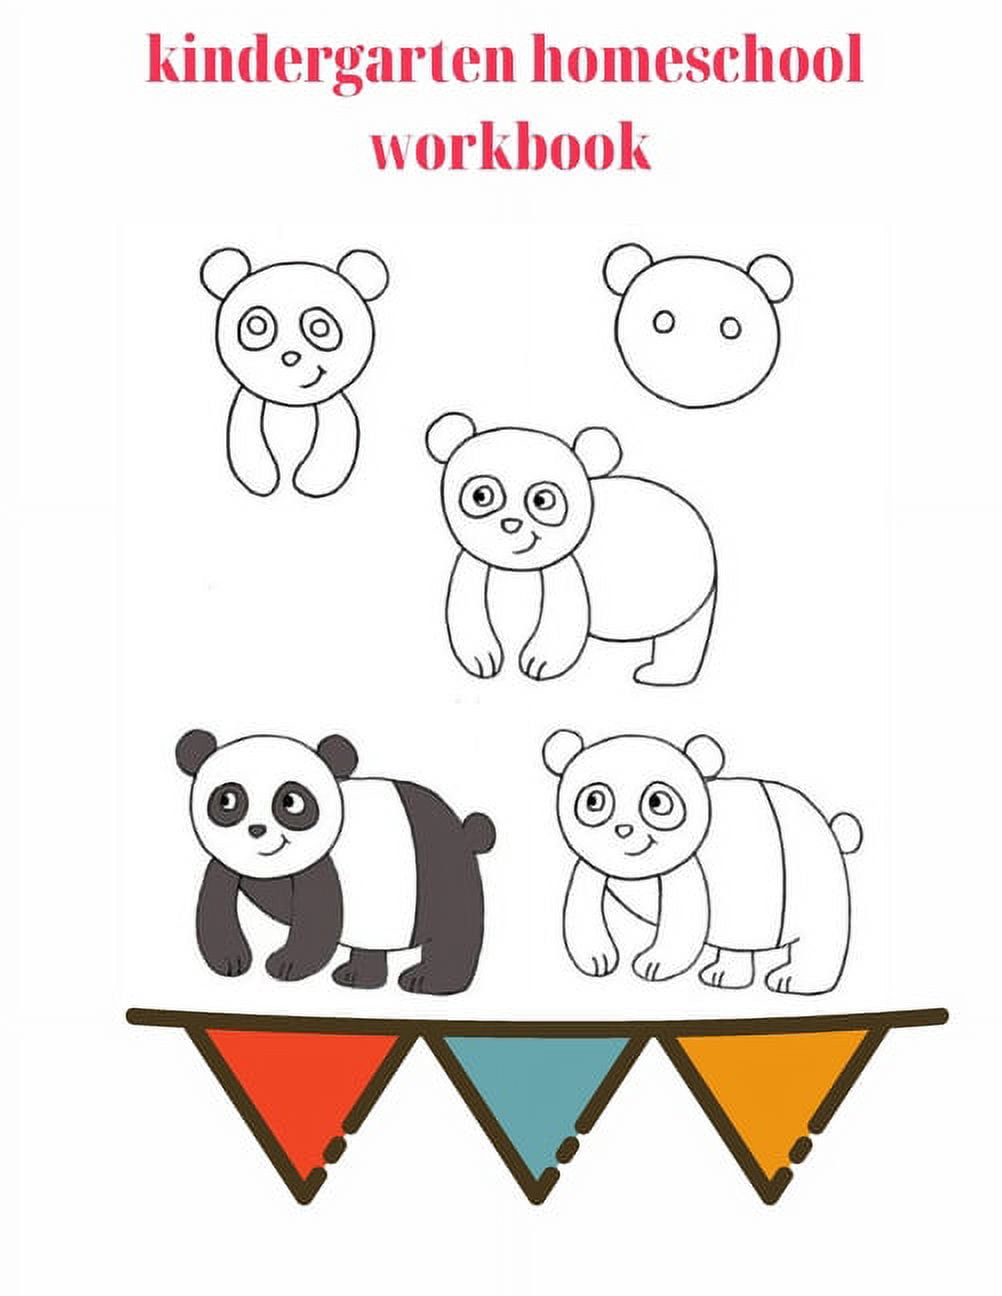 How To Draw A Panda For Kids, Step by Step, Drawing Guide, by Dawn -  DragoArt